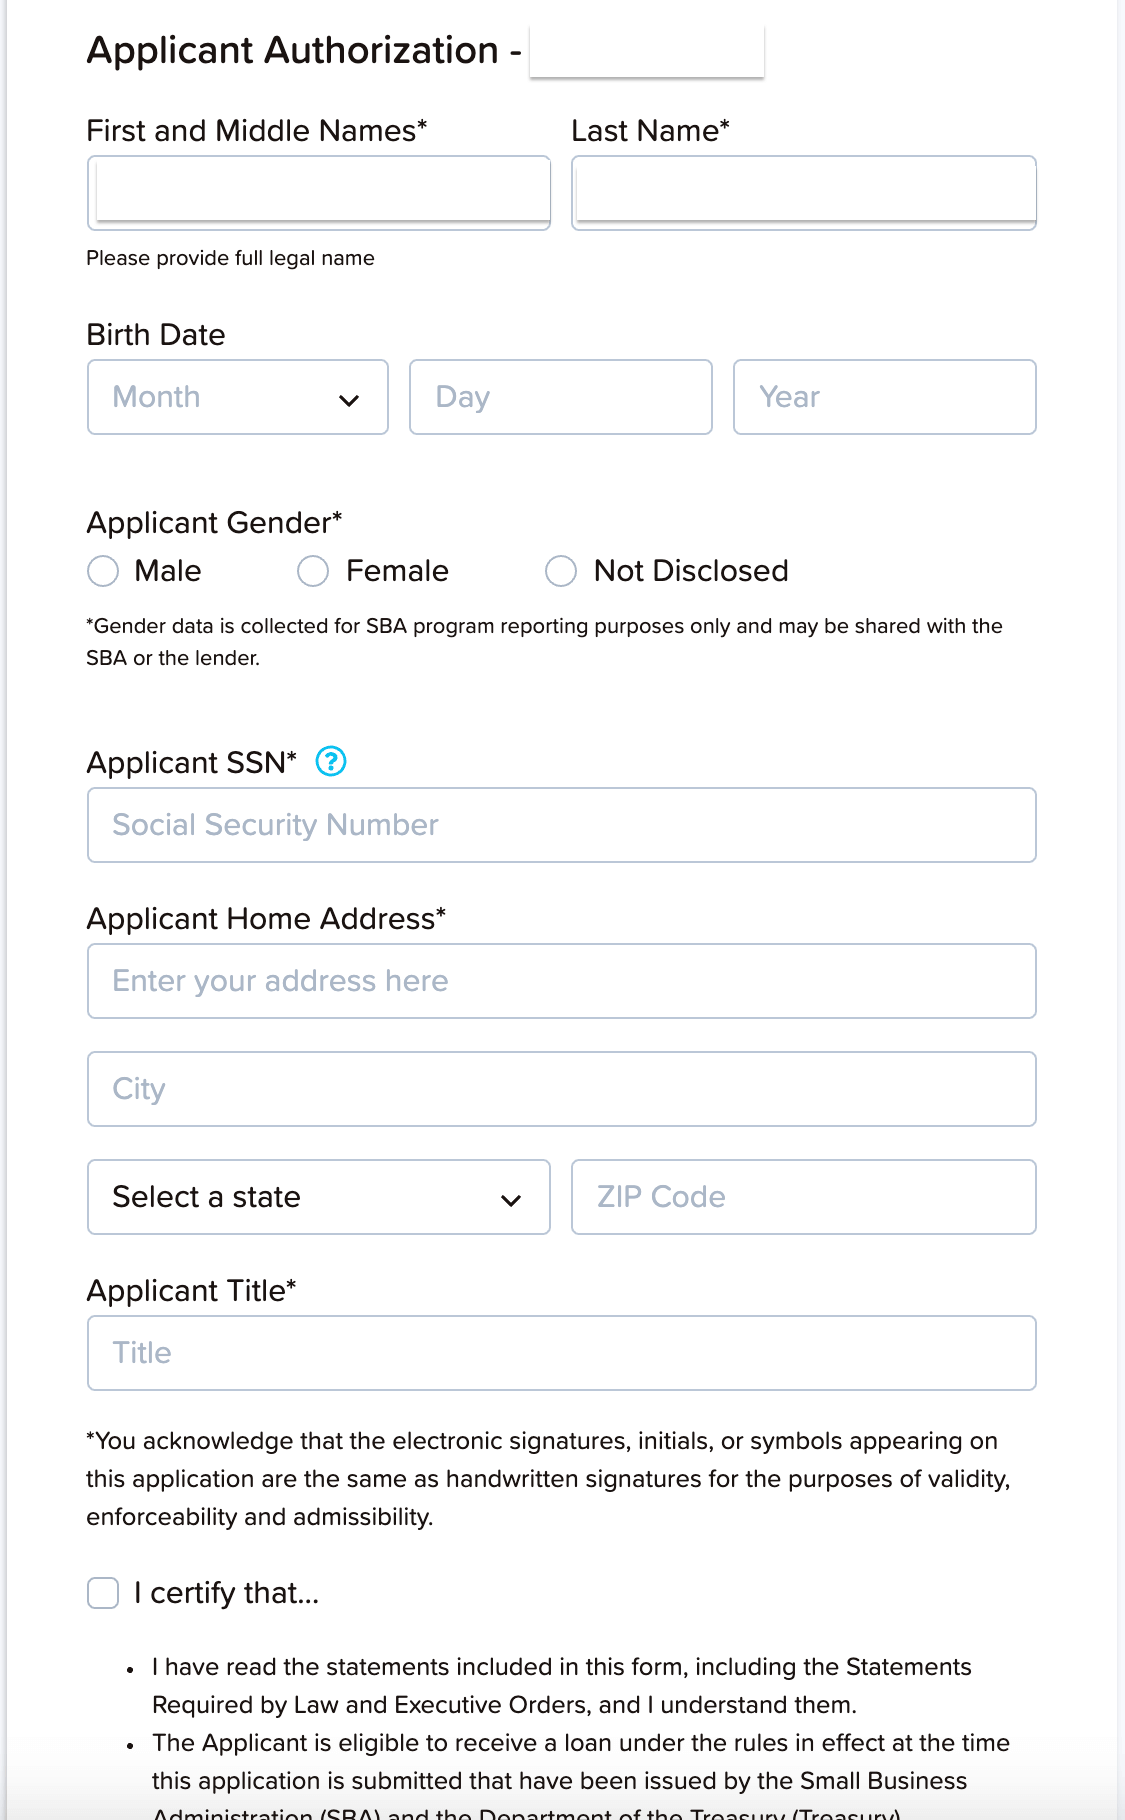 confirm e-sign on PPP application